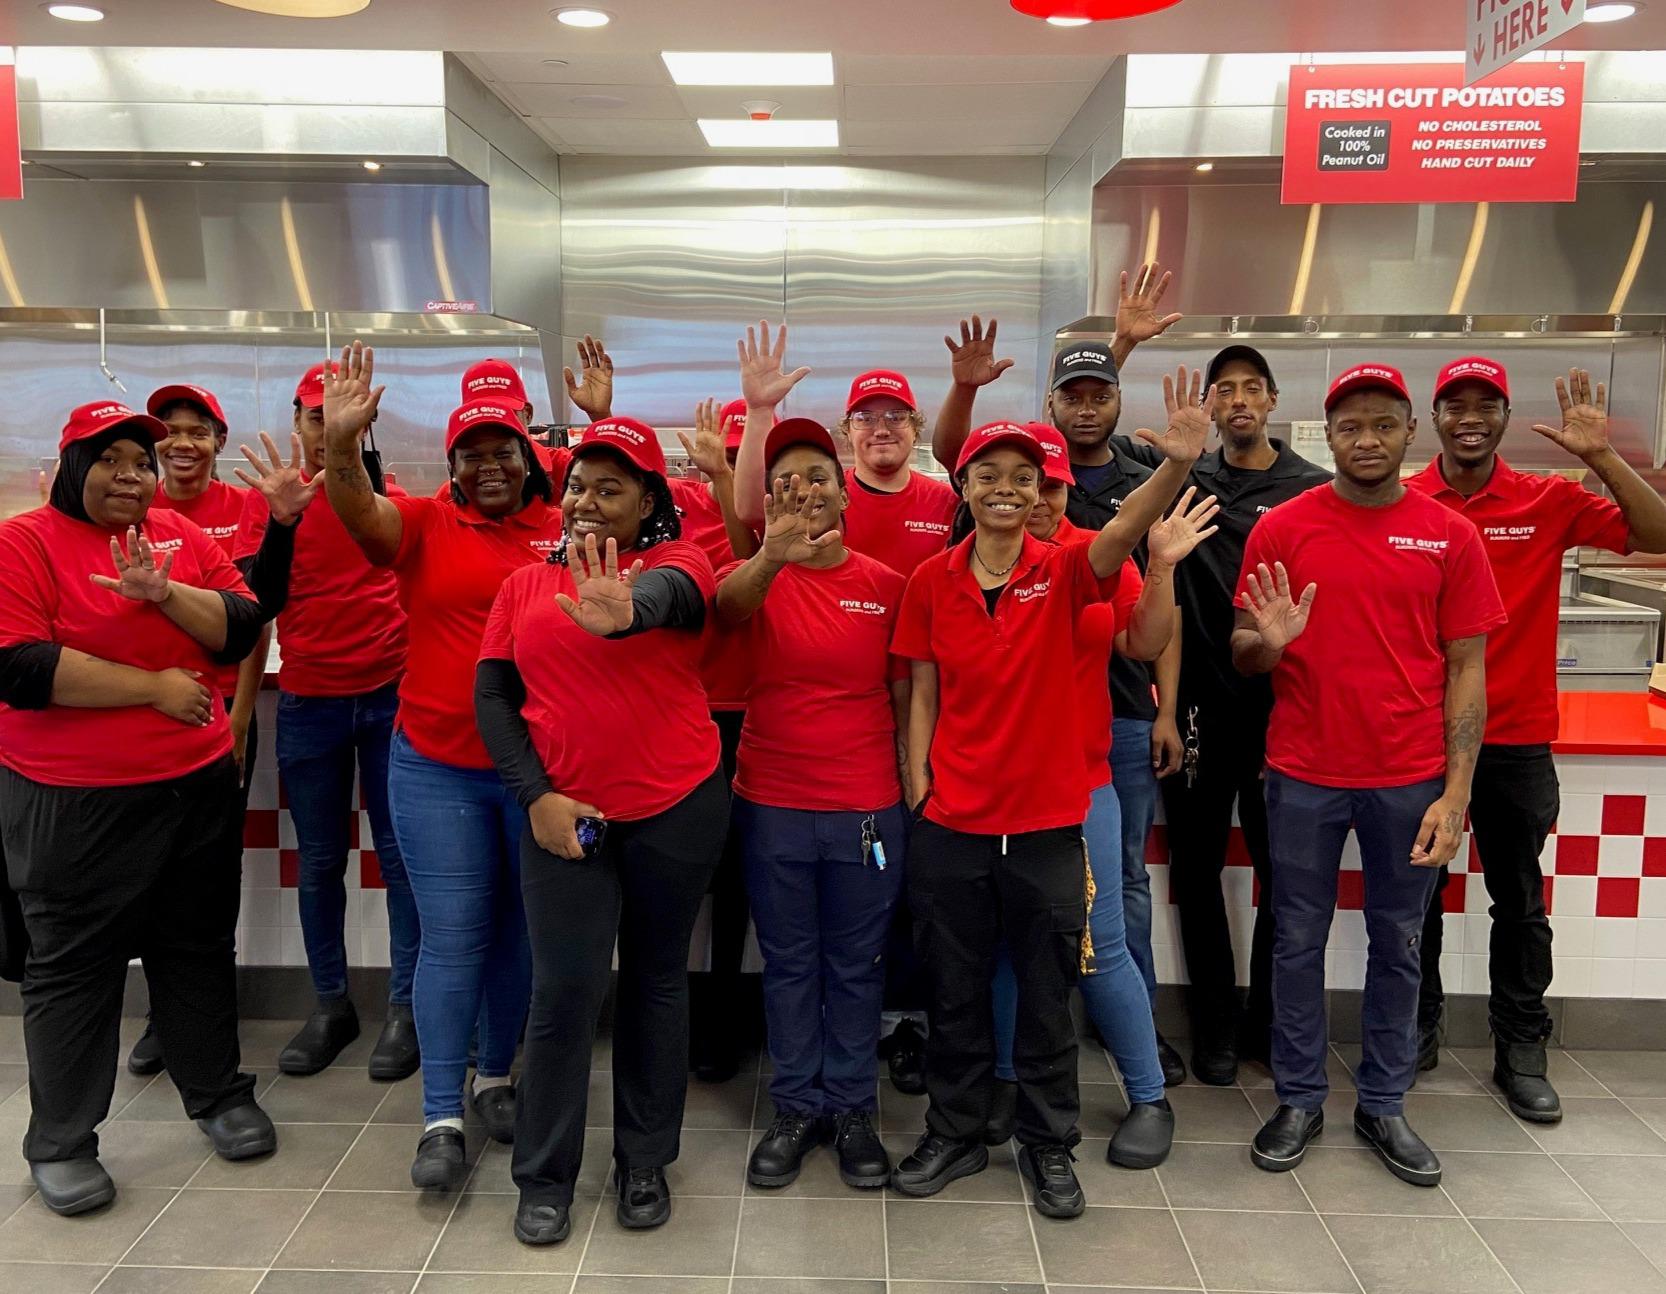 Crew members pose for a photograph ahead of the grand opening of the Five Guys restaurant at 3714 Spruce Street in Philadelphia, Pennsylvania.